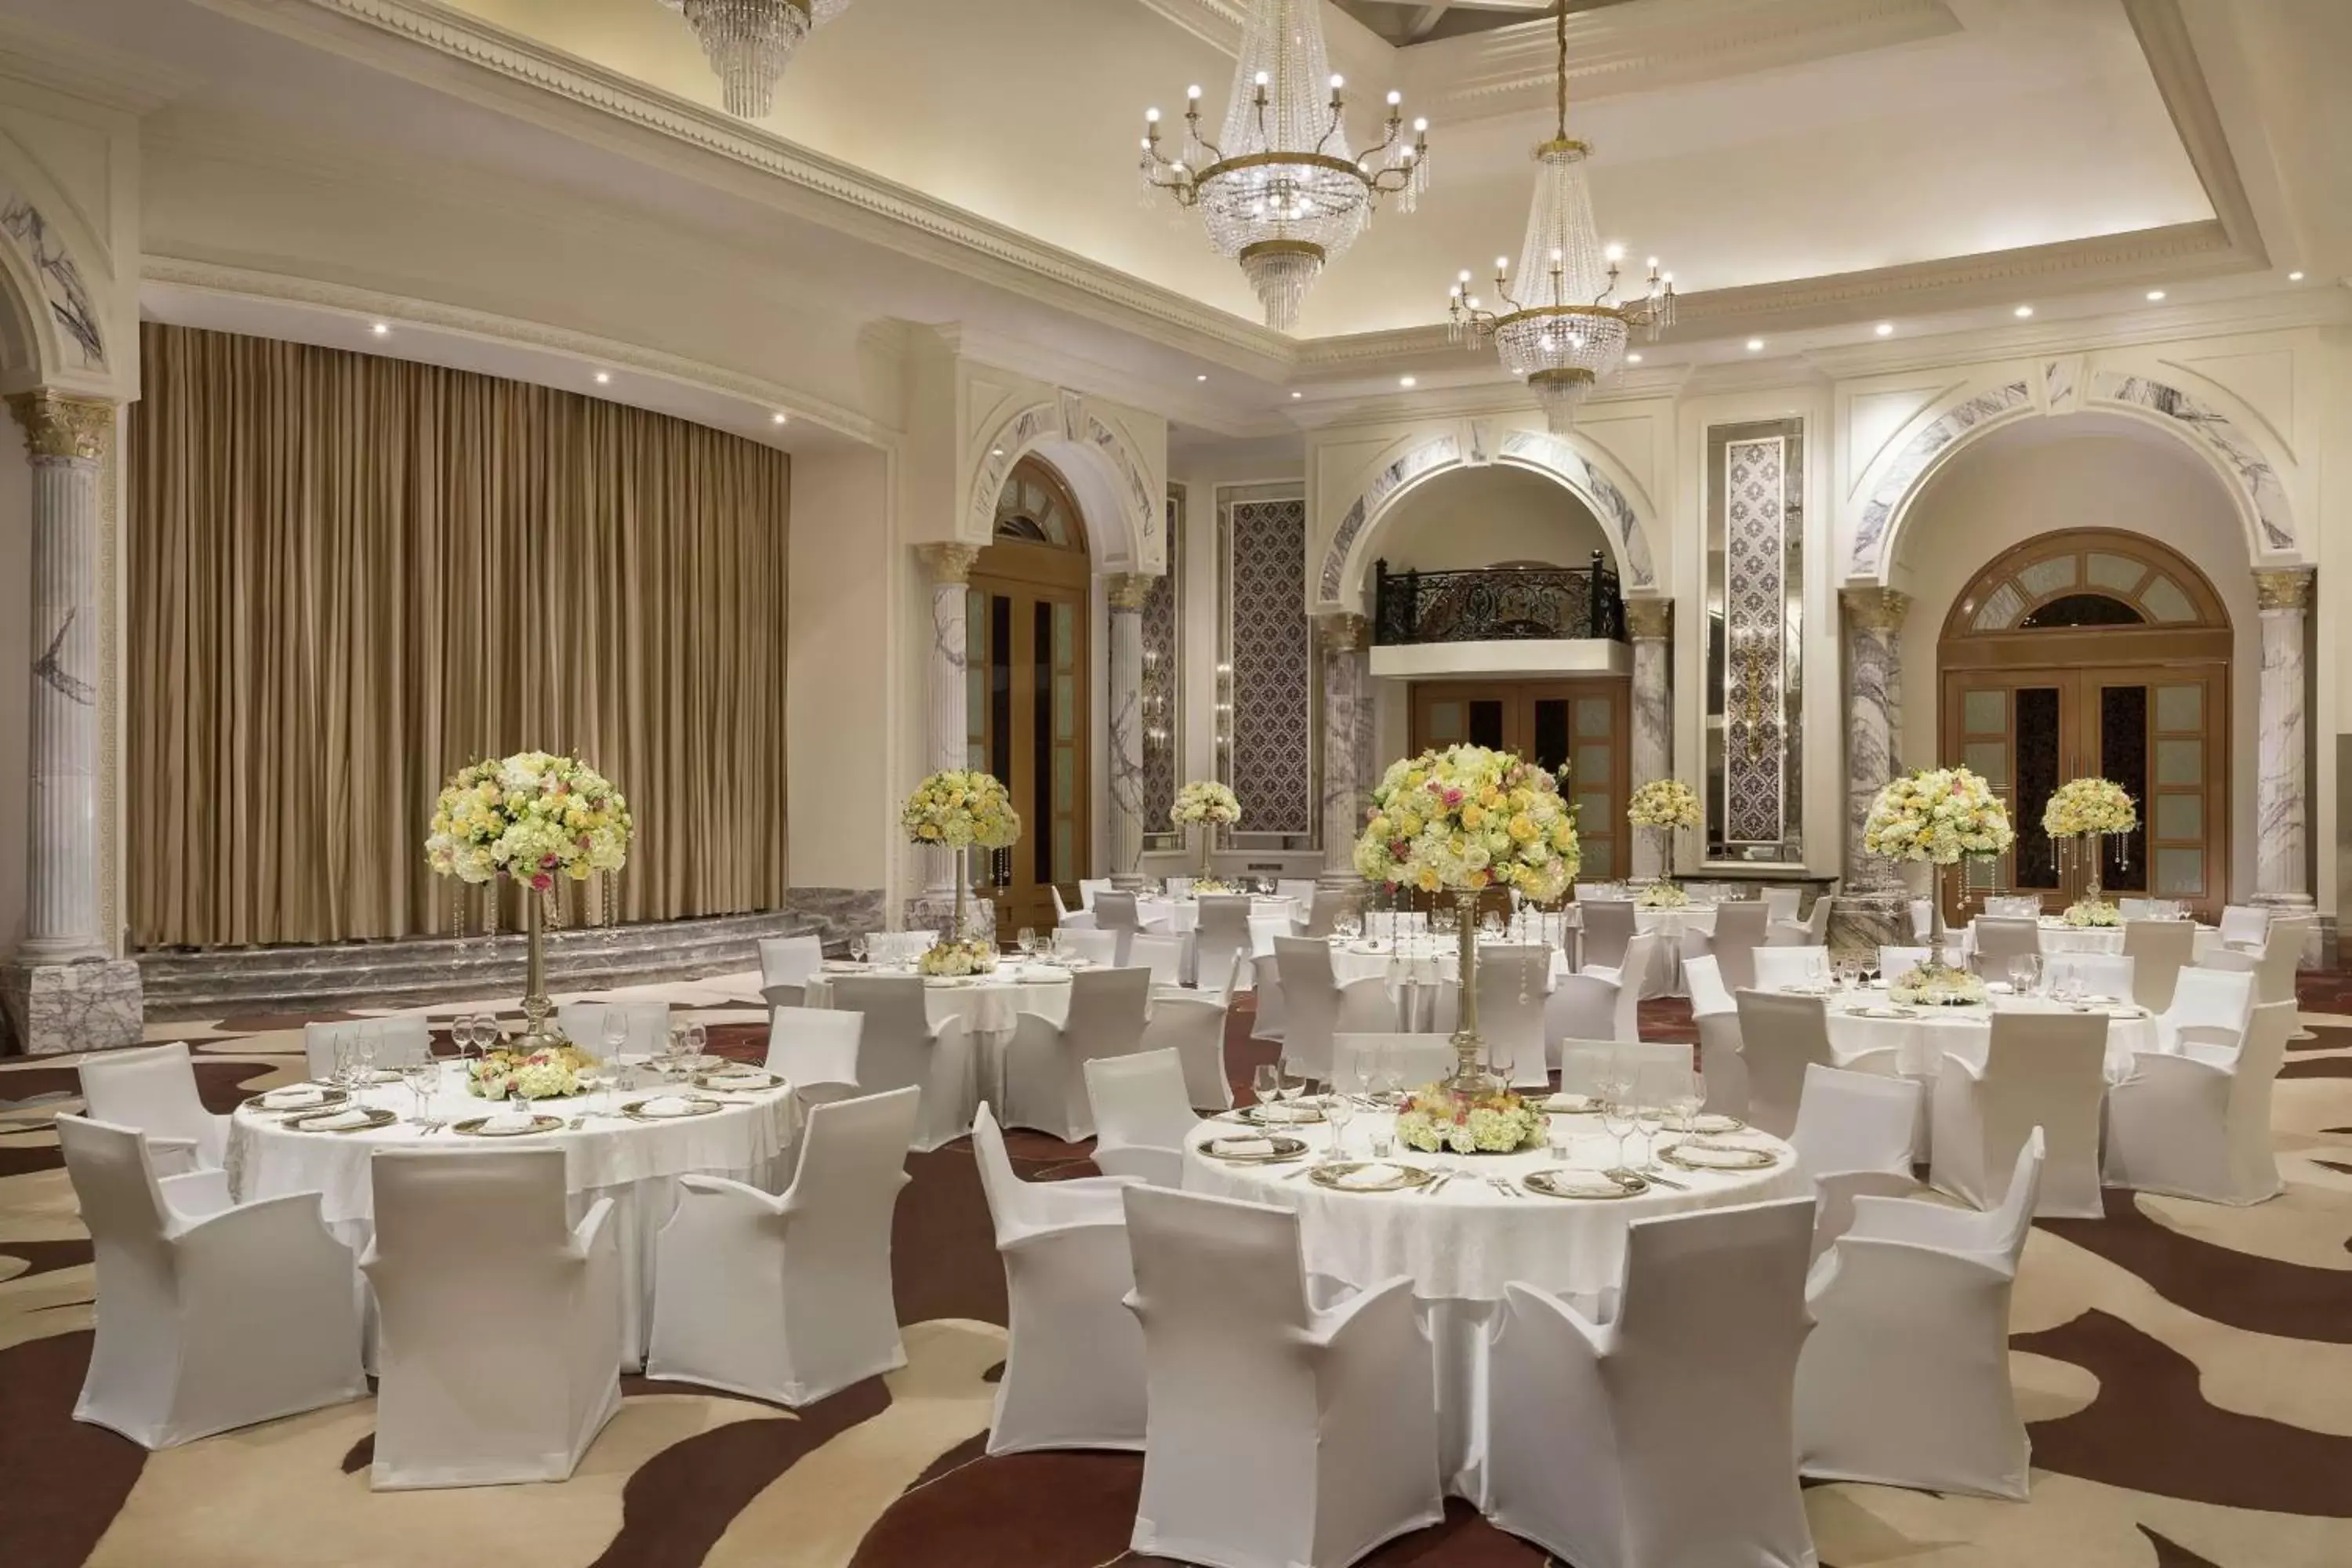 Meeting/conference room, Banquet Facilities in Habtoor Palace Dubai, LXR Hotels & Resorts